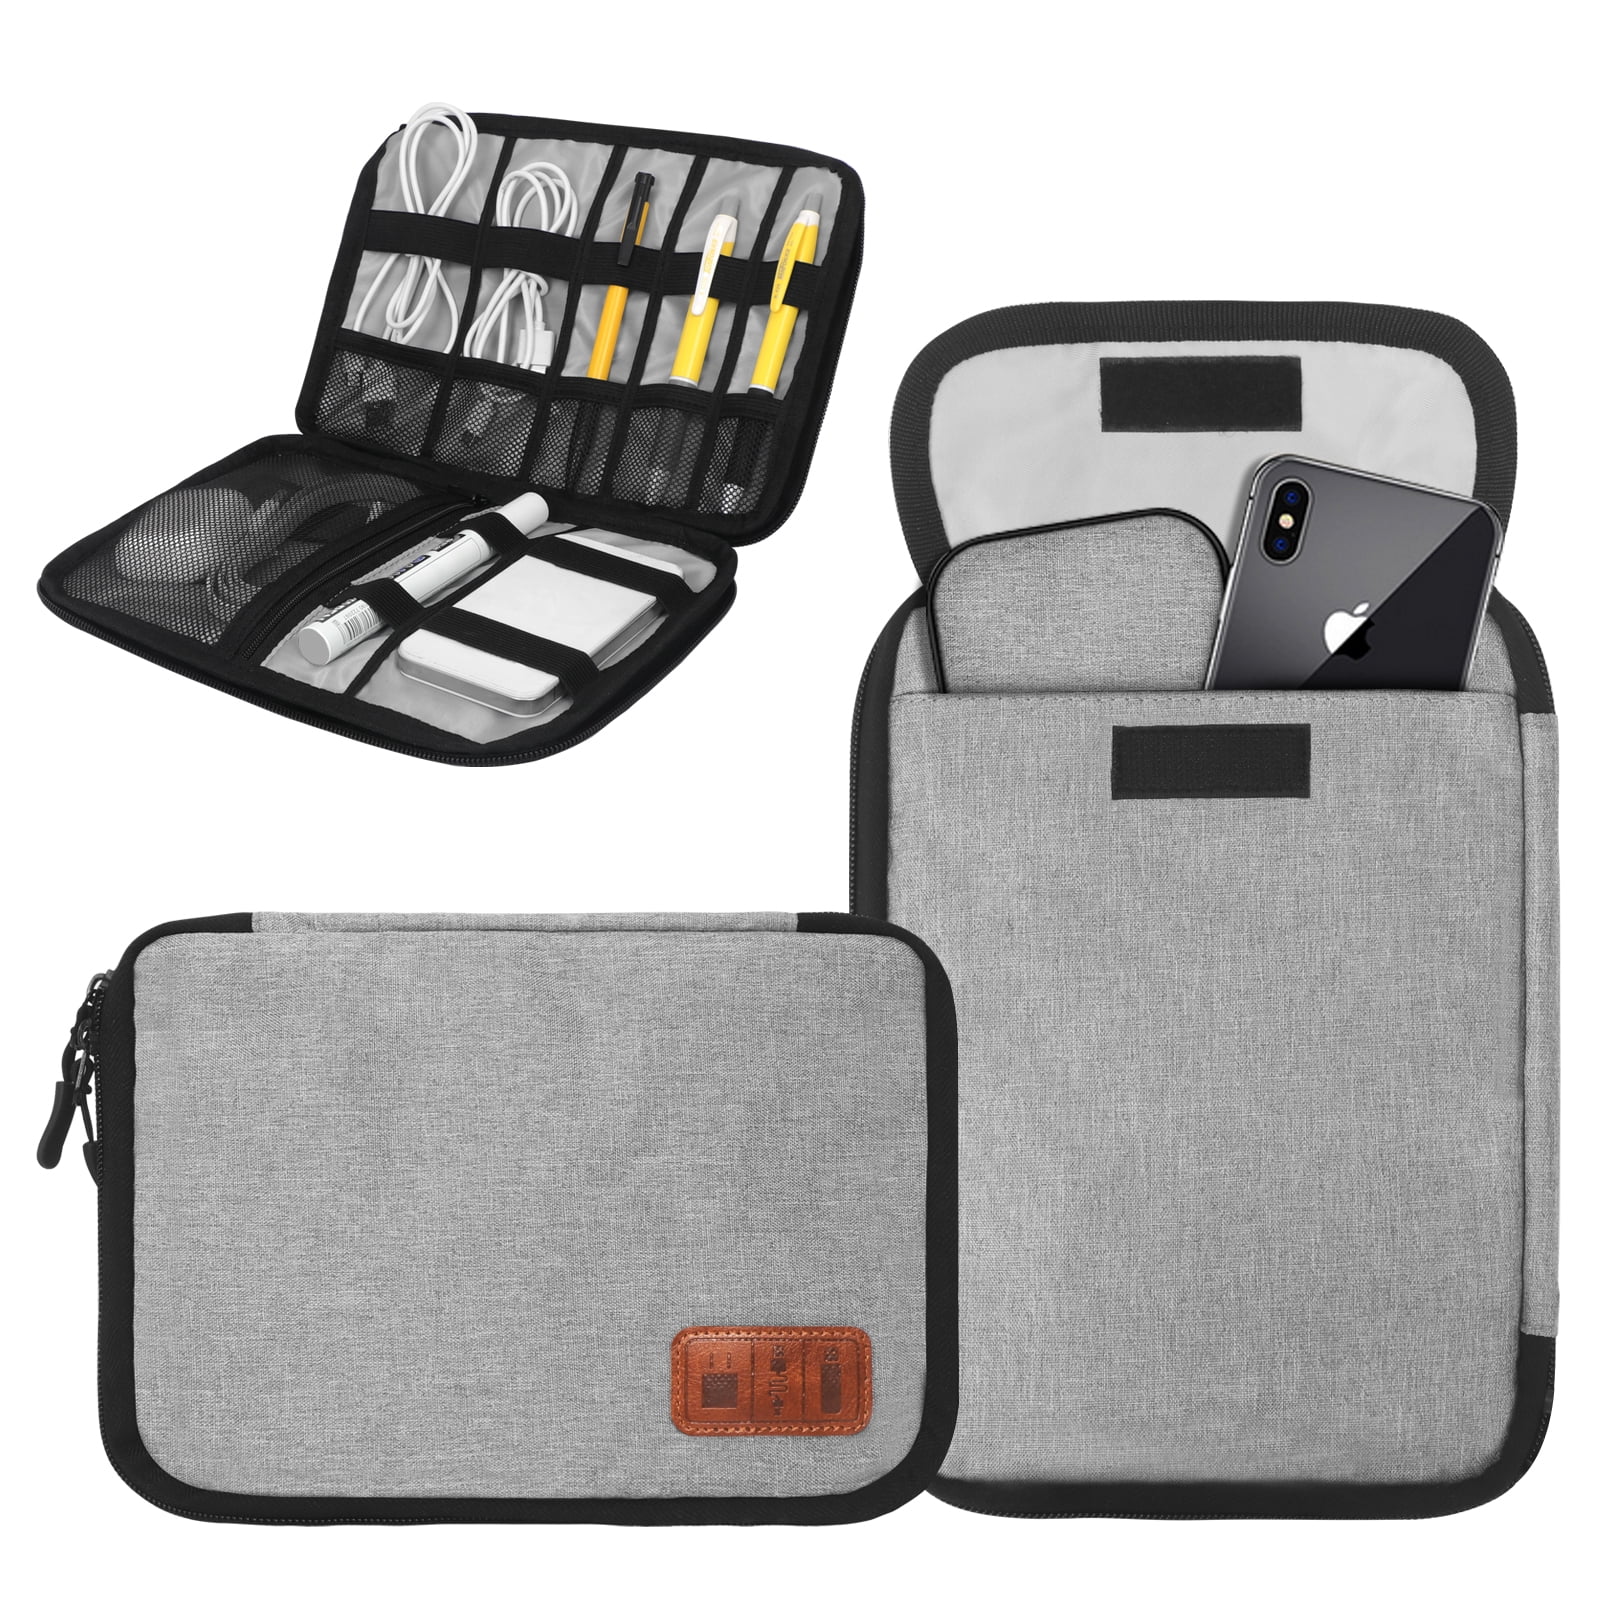 Electronics Accessories Organizer Bag Grey Silhouette Dandelion Hearts On White Electronics Organizer Electronic Accessories Bag Storage Bag of Cases for Cable Sd Card Charger USB Phone